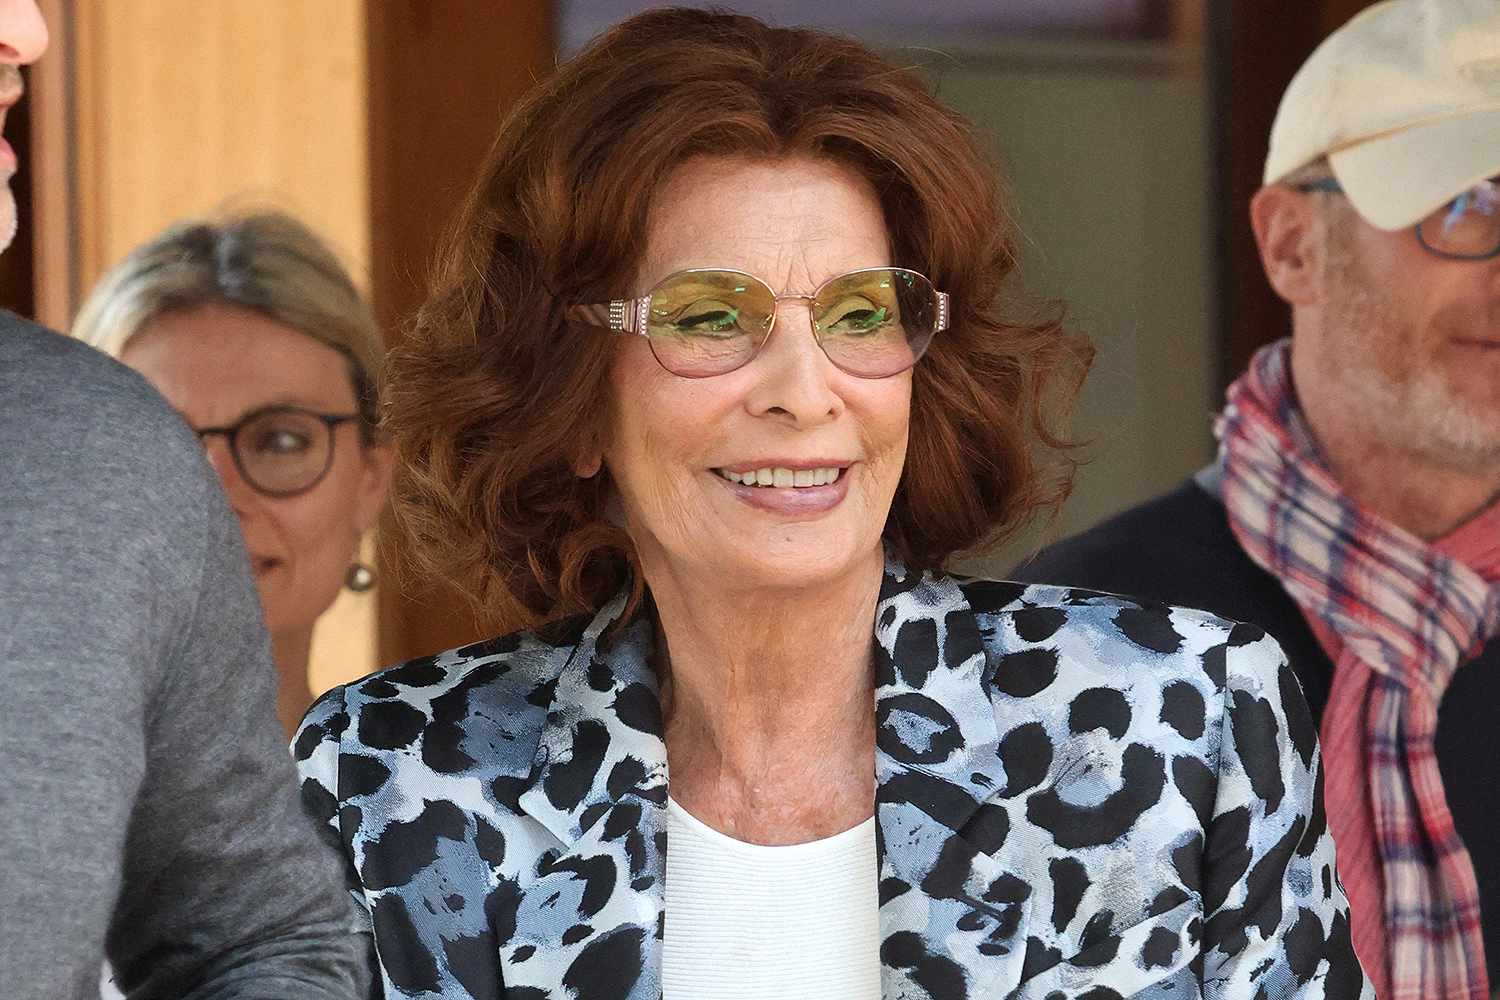 Sophia Loren Steps Out for Lunch with Friends Months After Fall at Swiss Home